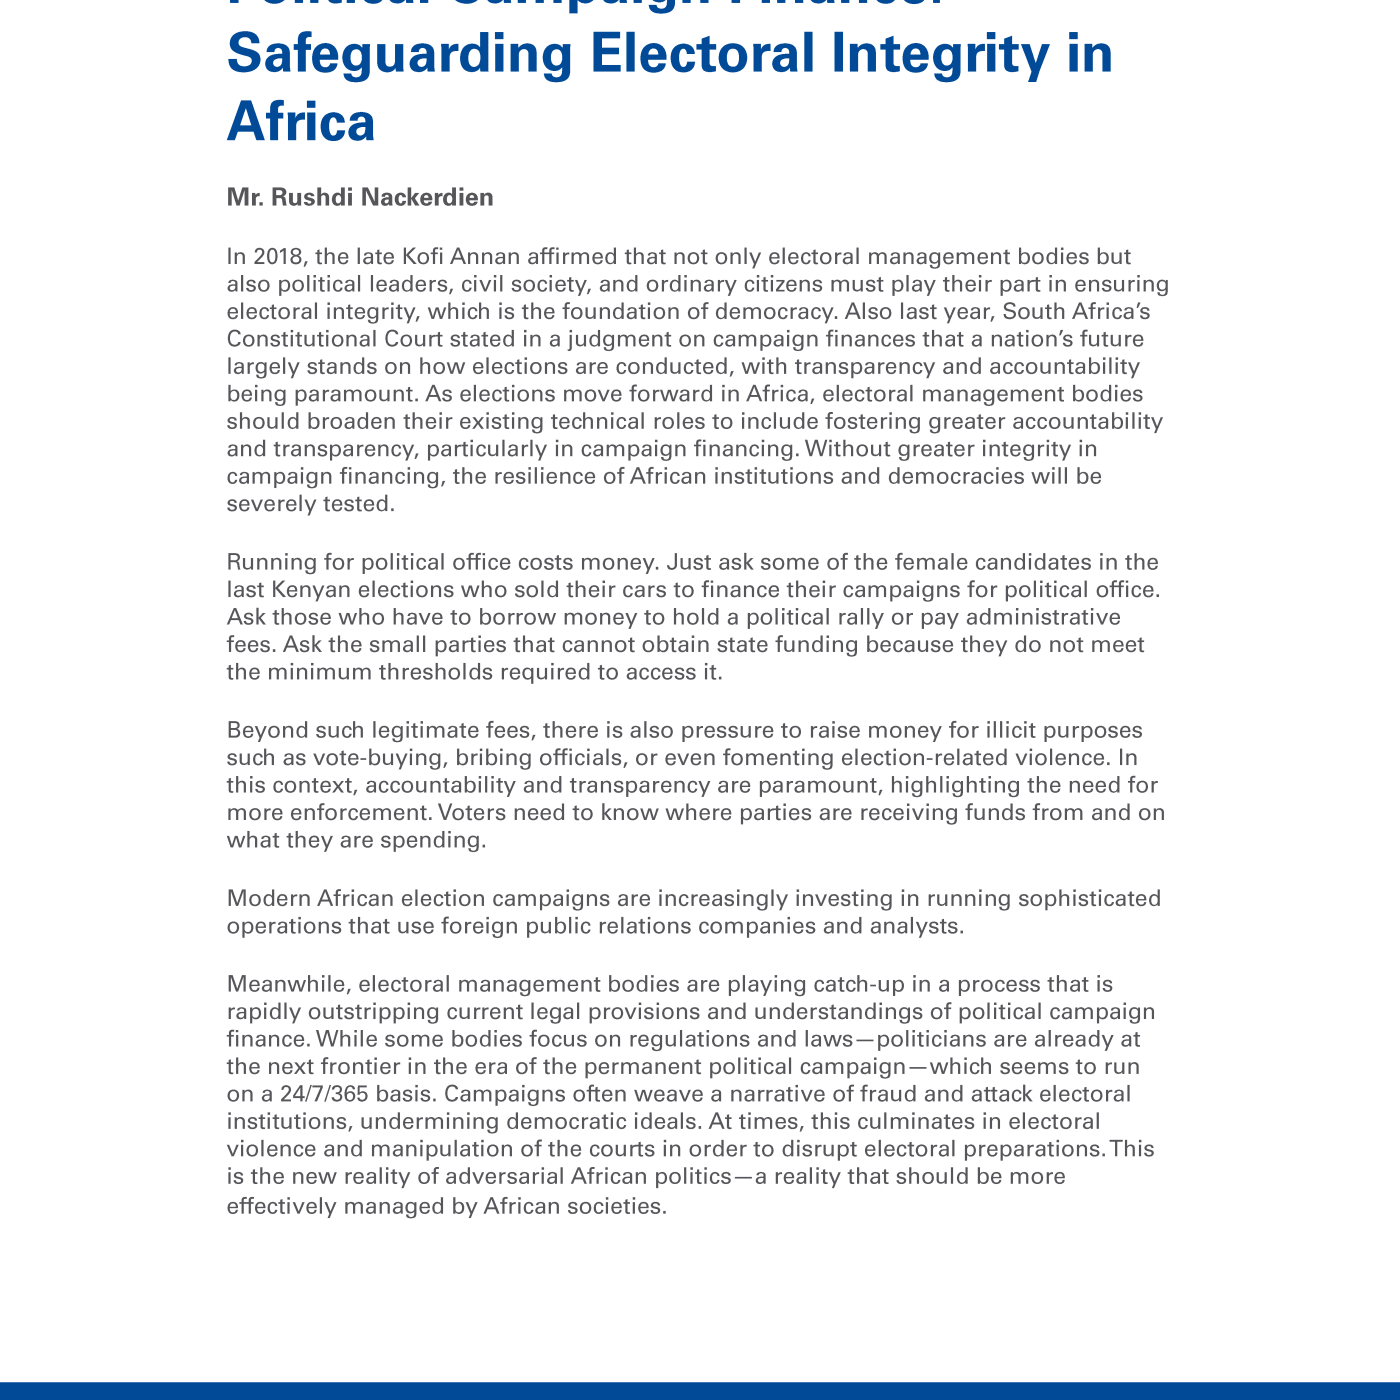 Political Campaign Finance: Safeguarding Electoral Integrity in Africa